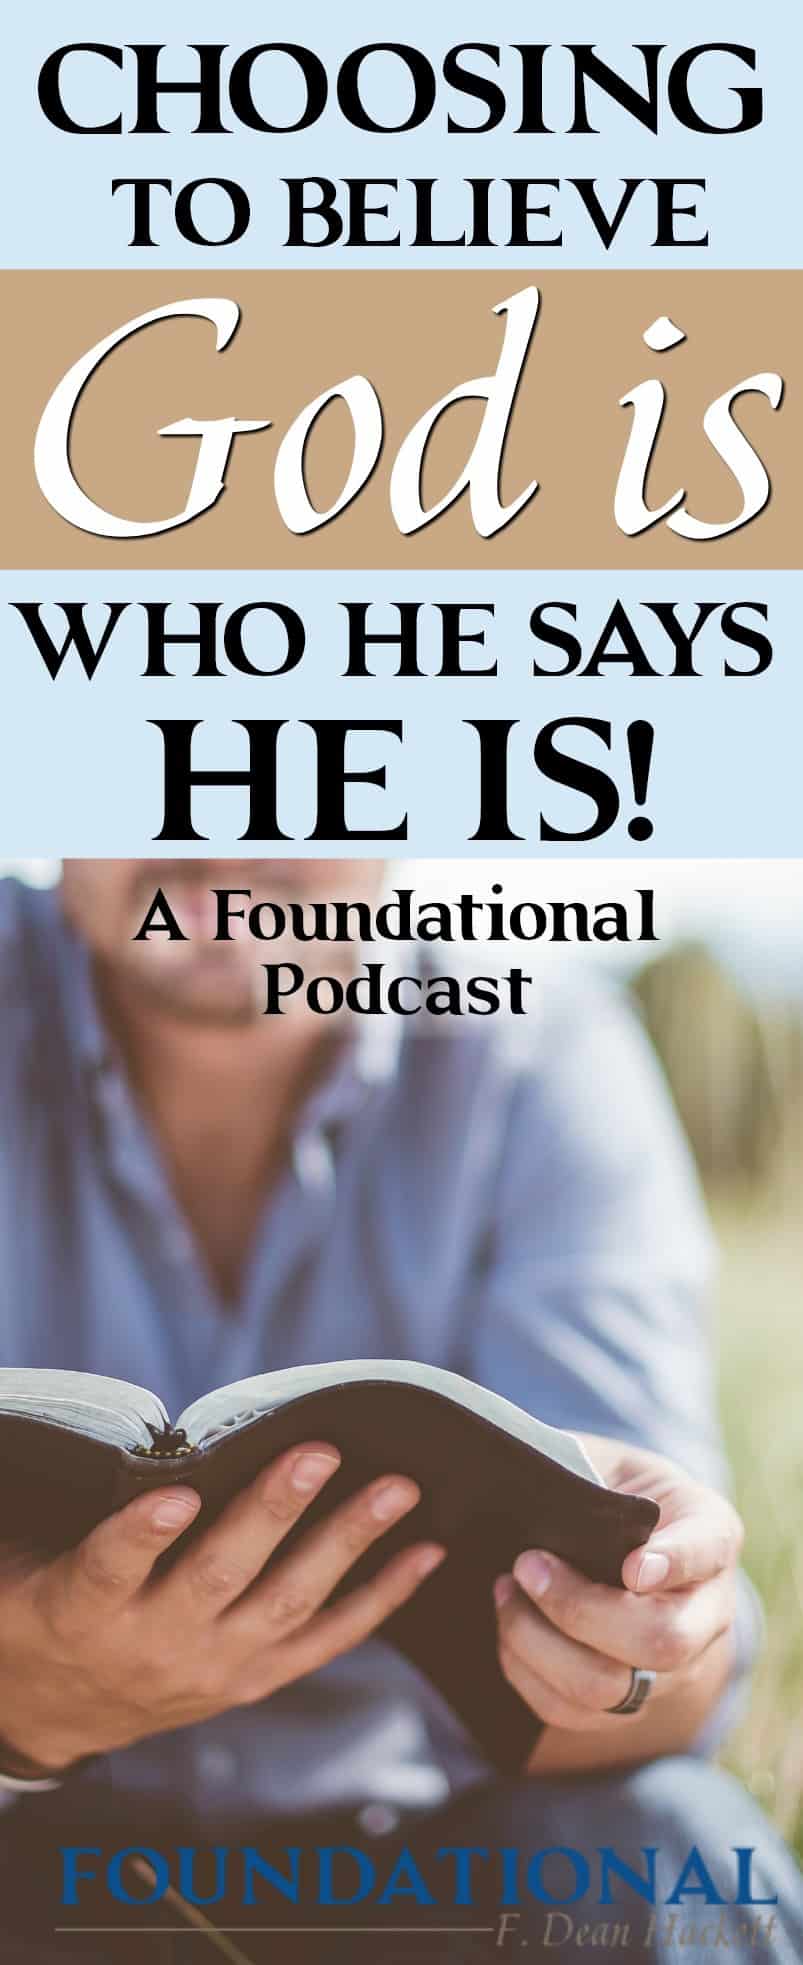 Choosing to Believe God Is Who He Says He Is. If you struggle with believing God, this podcast series on 